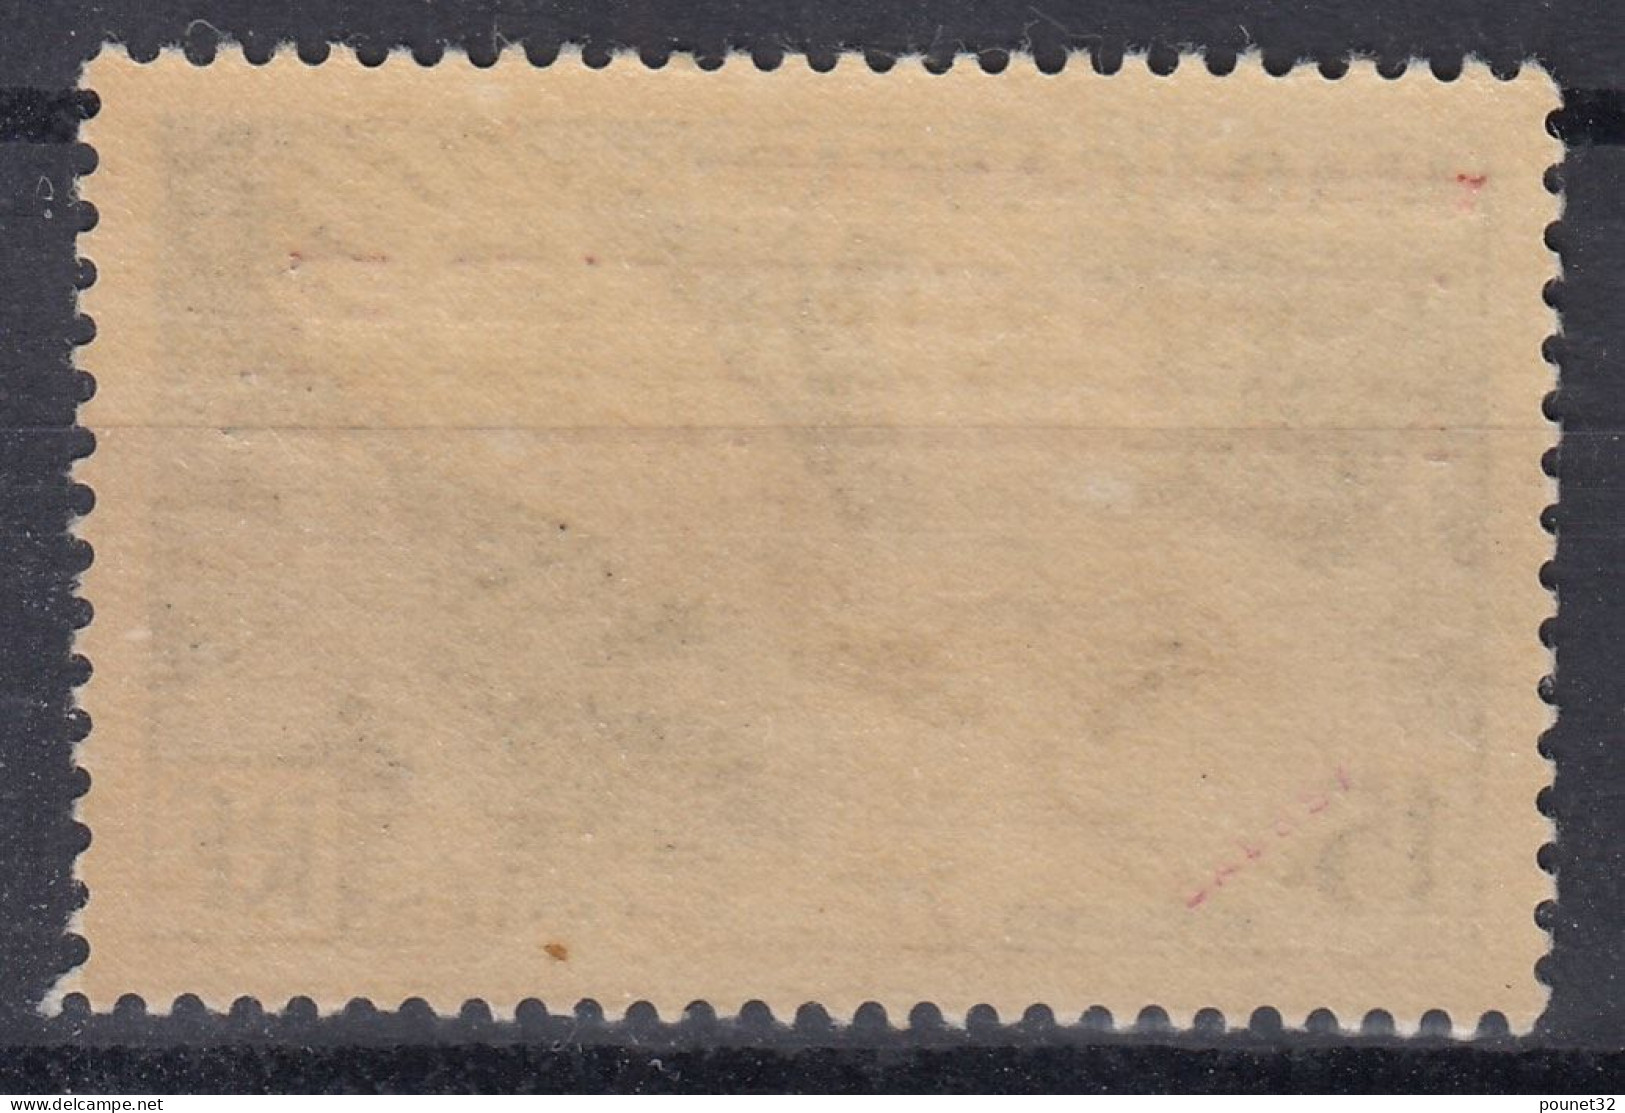 TIMBRE TAAF MADAGASCAR SURCHARGE ROUGE N° 1 NEUF ** GOMME SANS CHARNIERE - Unused Stamps